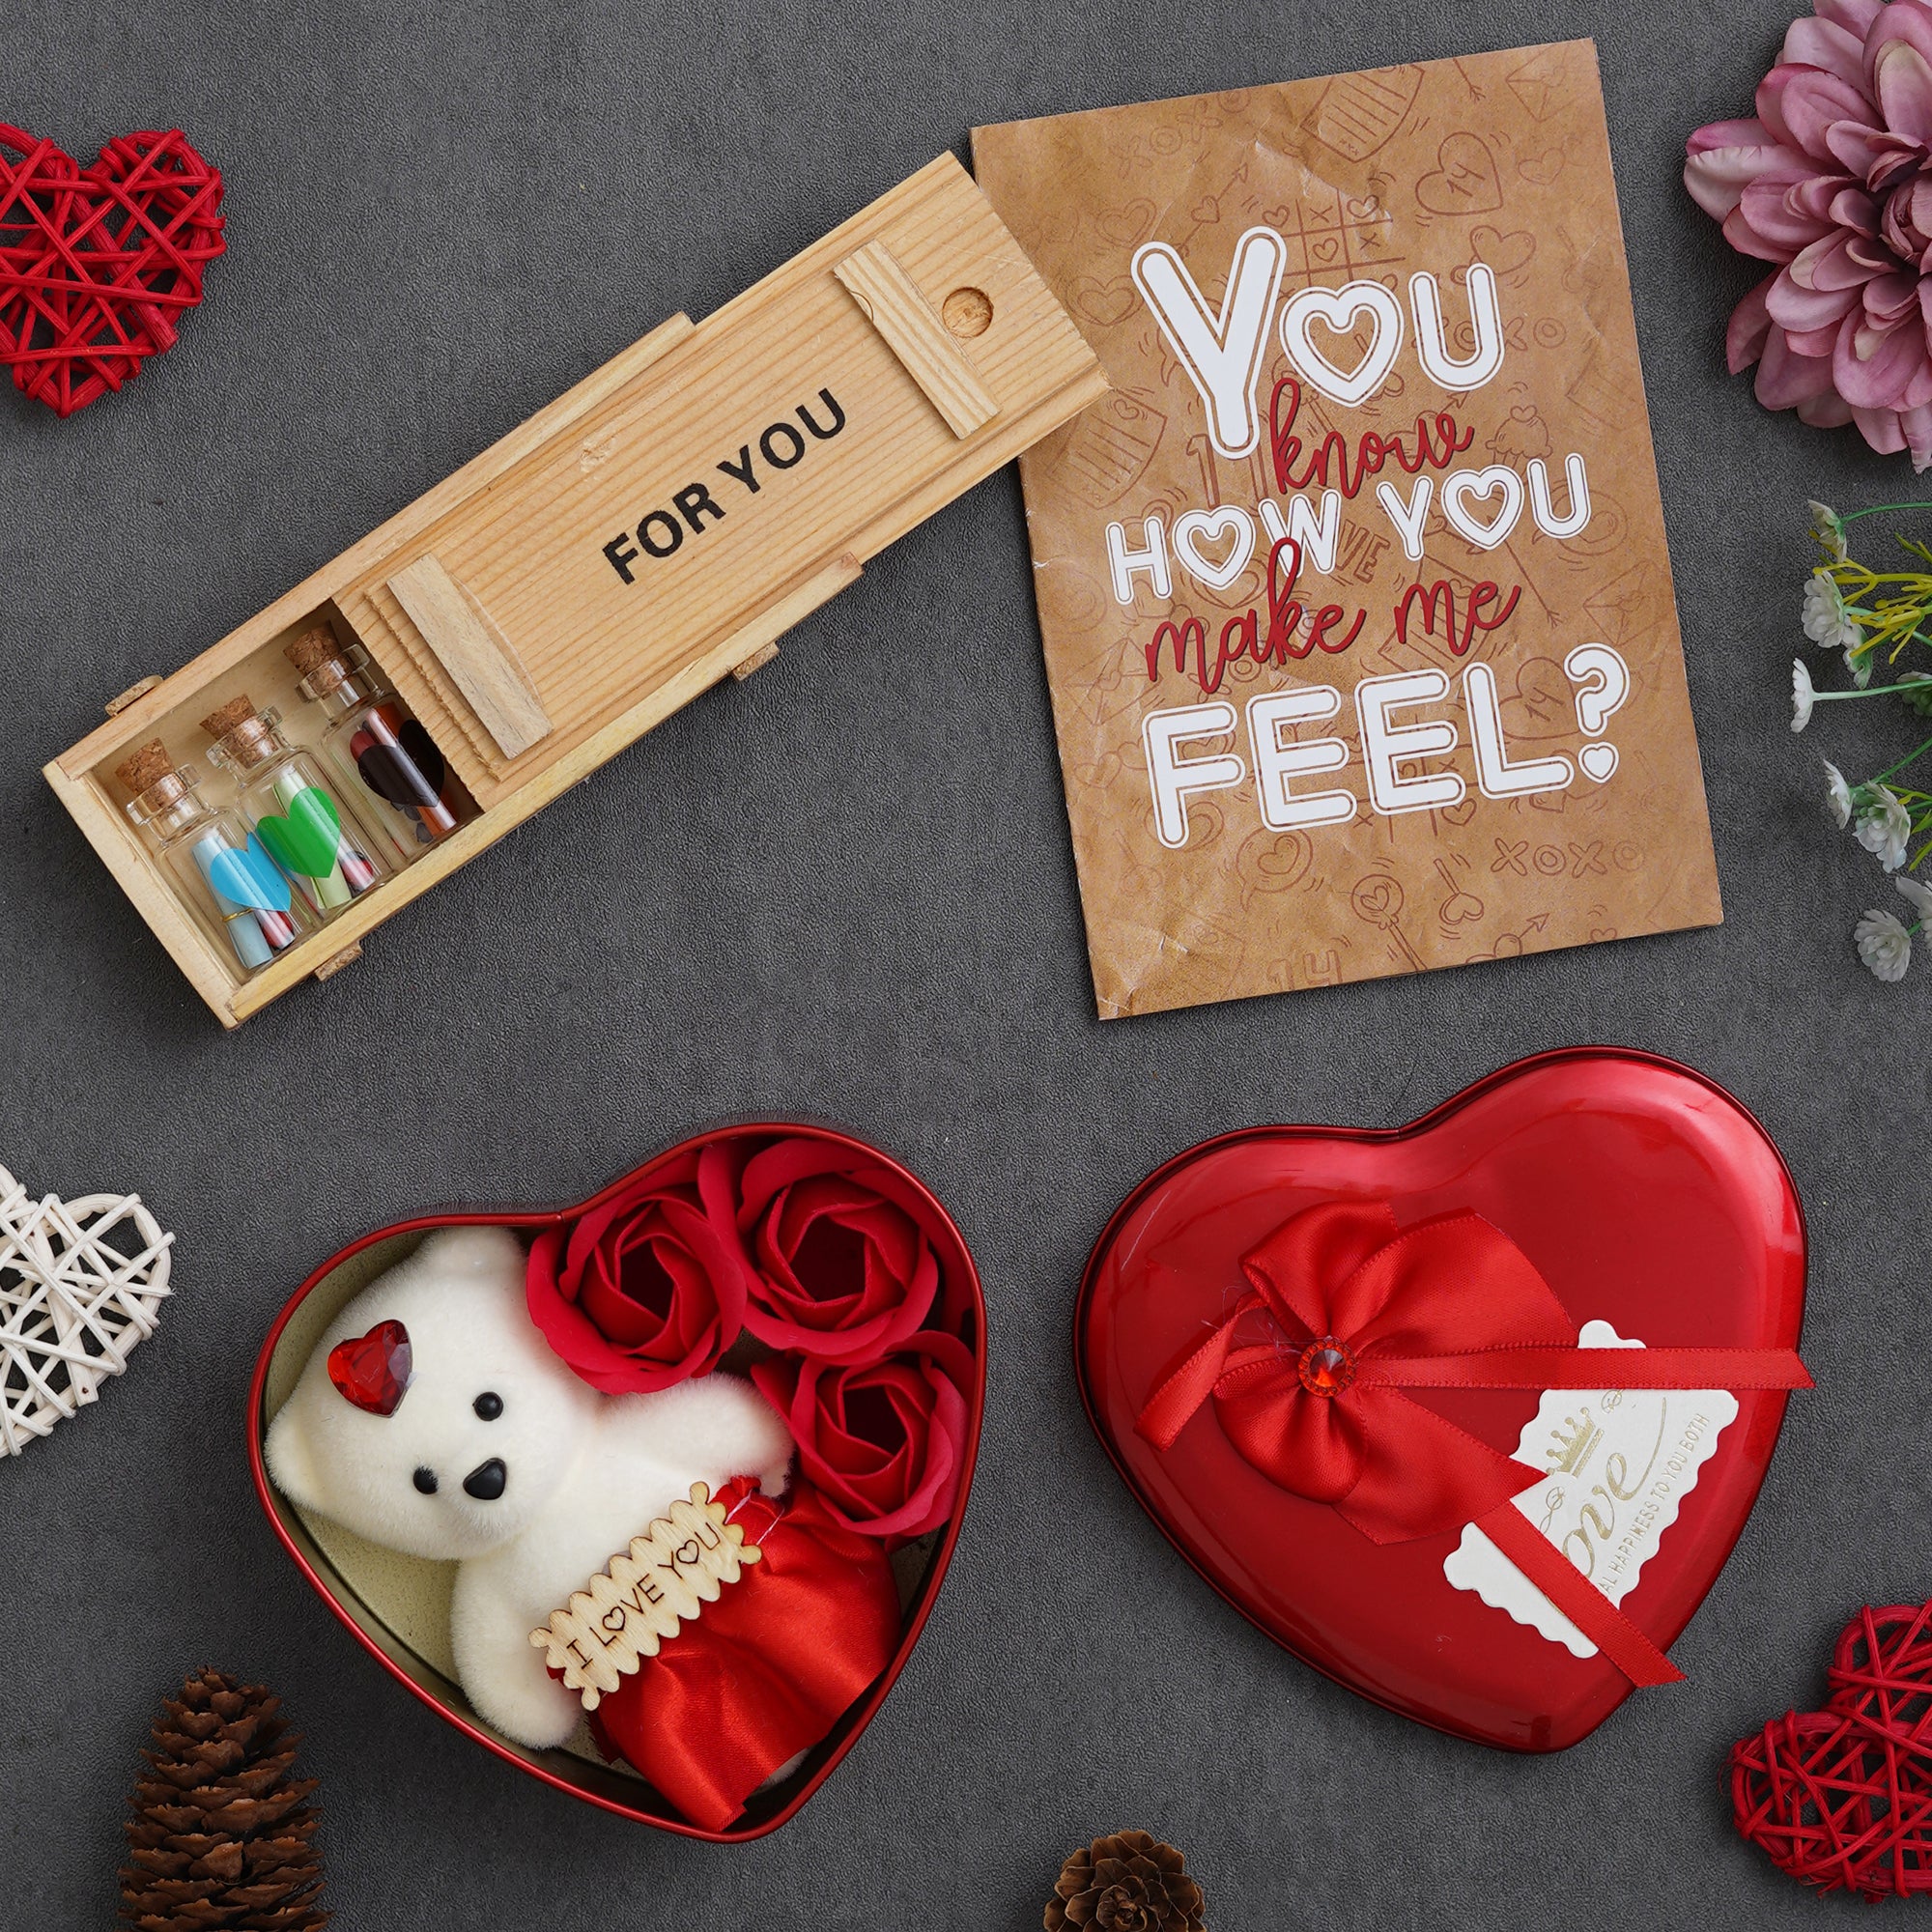 Valentine Combo of Card, Heart Shaped Gift Box Set with White Teddy and Red Roses, Wooden Box "For You" Message Bottle Set